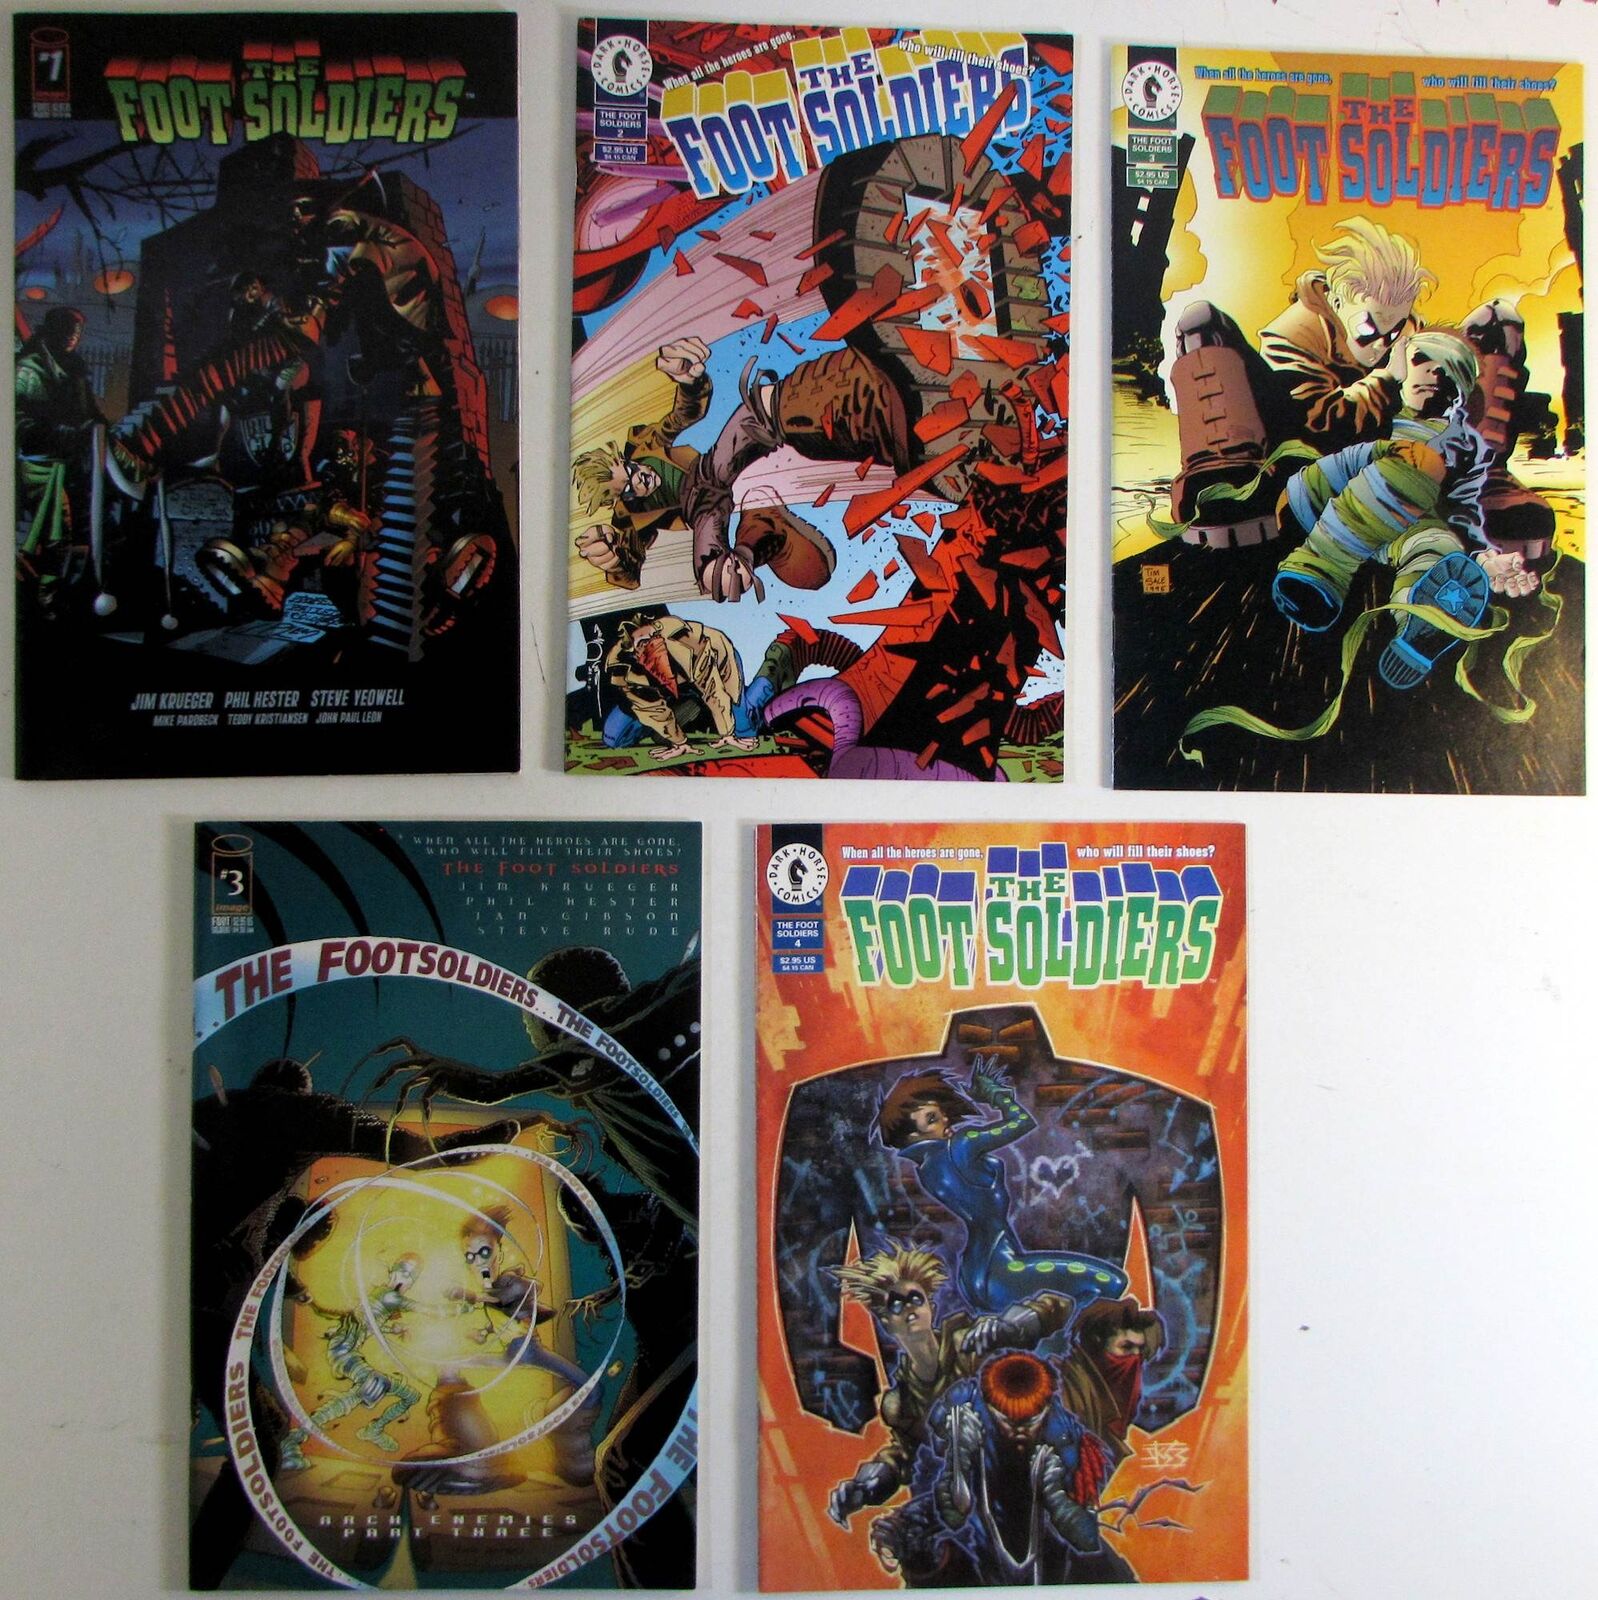 1996 Foot Soldiers Lot of 5 #2,3,4,Image 1,3 Dark Horse Comic Books